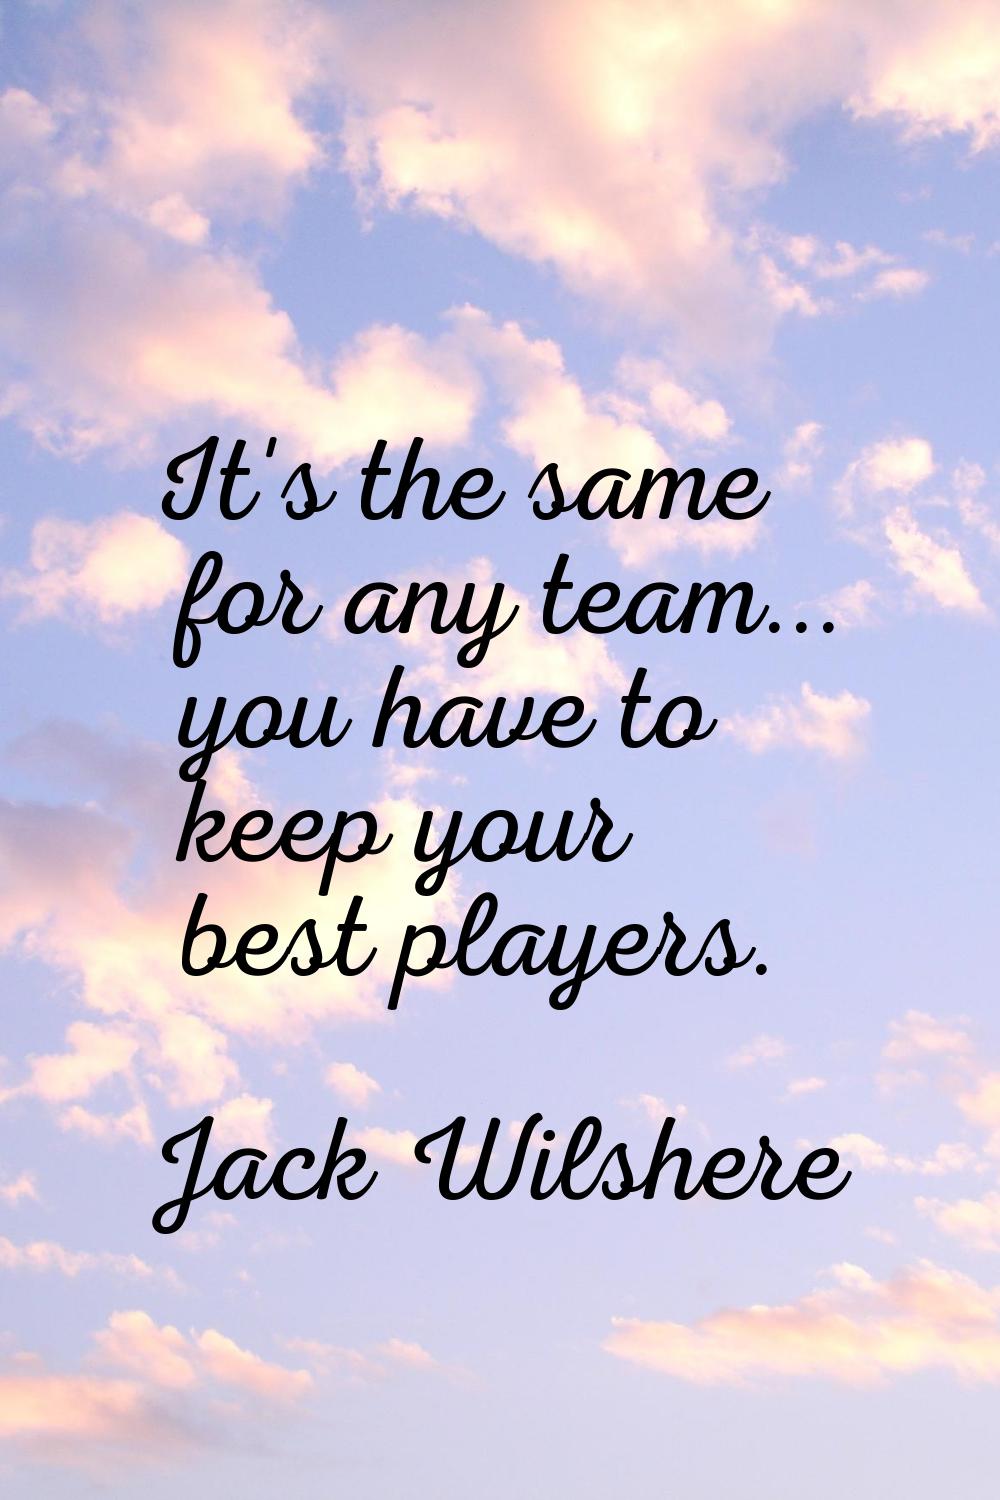 It's the same for any team... you have to keep your best players.